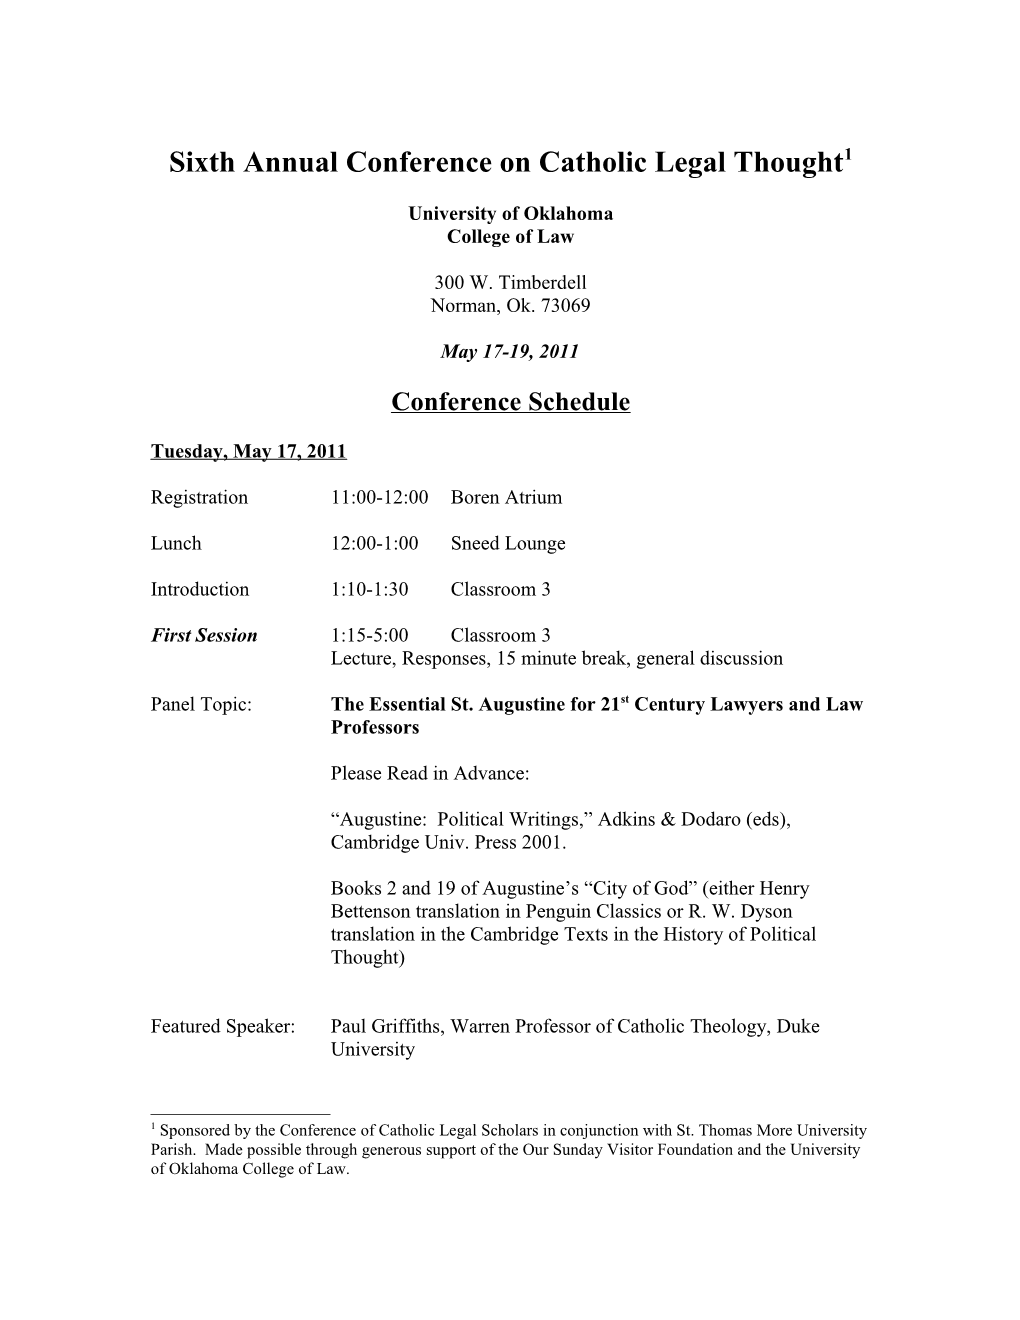 Fifth Annual Catholic Legal Scholars Conference